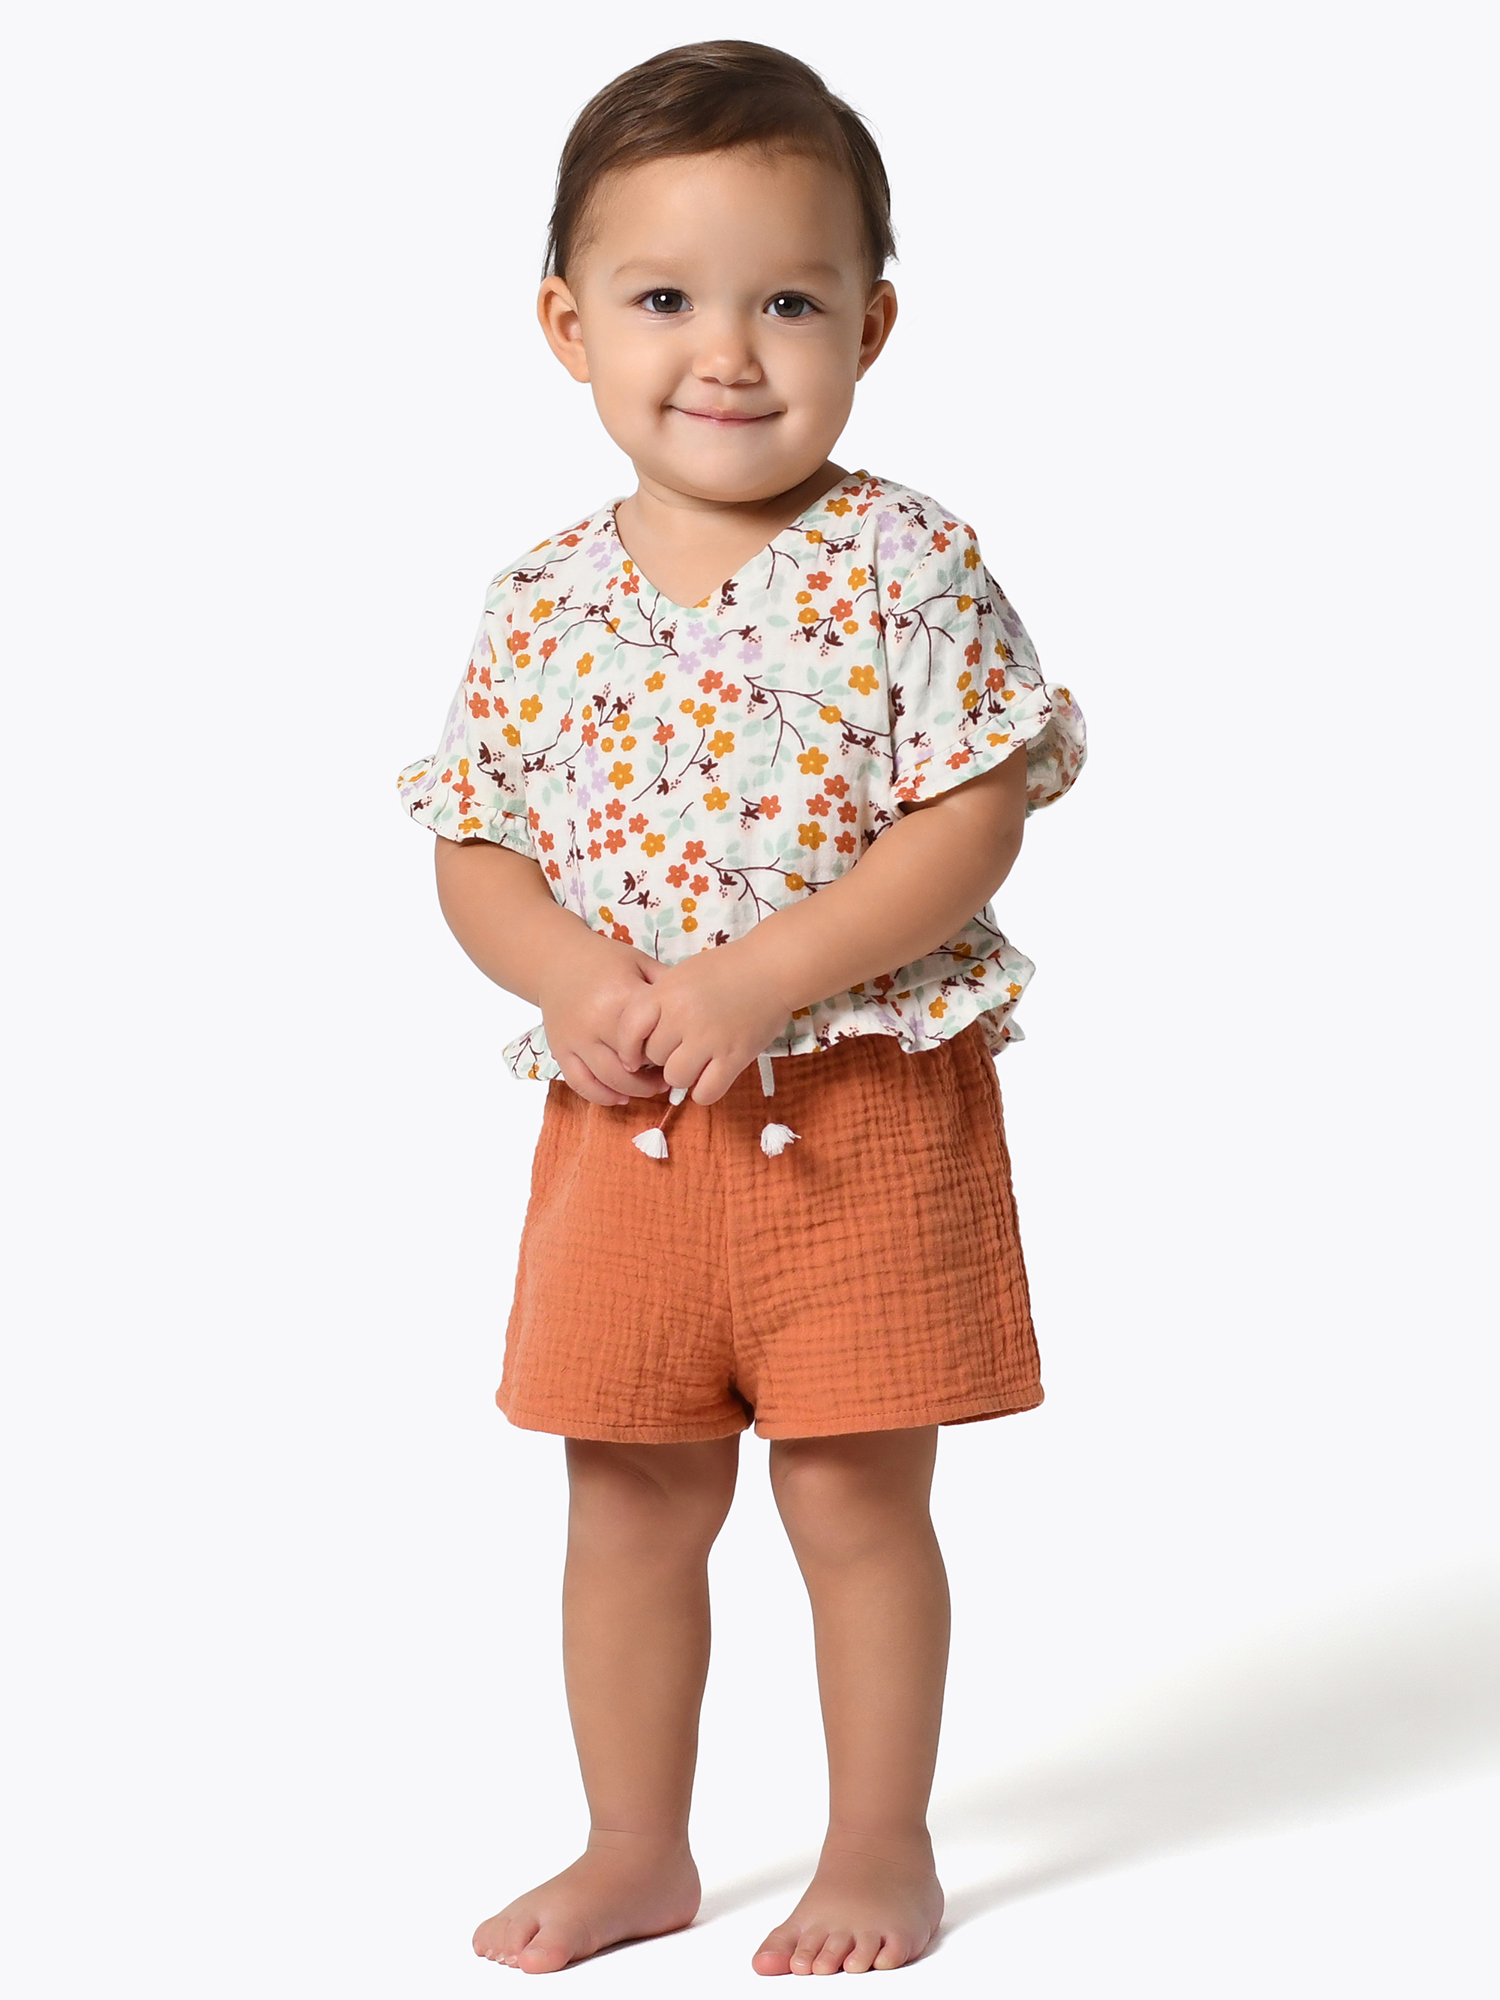 Modern Moments by Gerber Toddler Girl Gauze Shorts, 2-Pack, Sizes 12M-5T - image 2 of 13